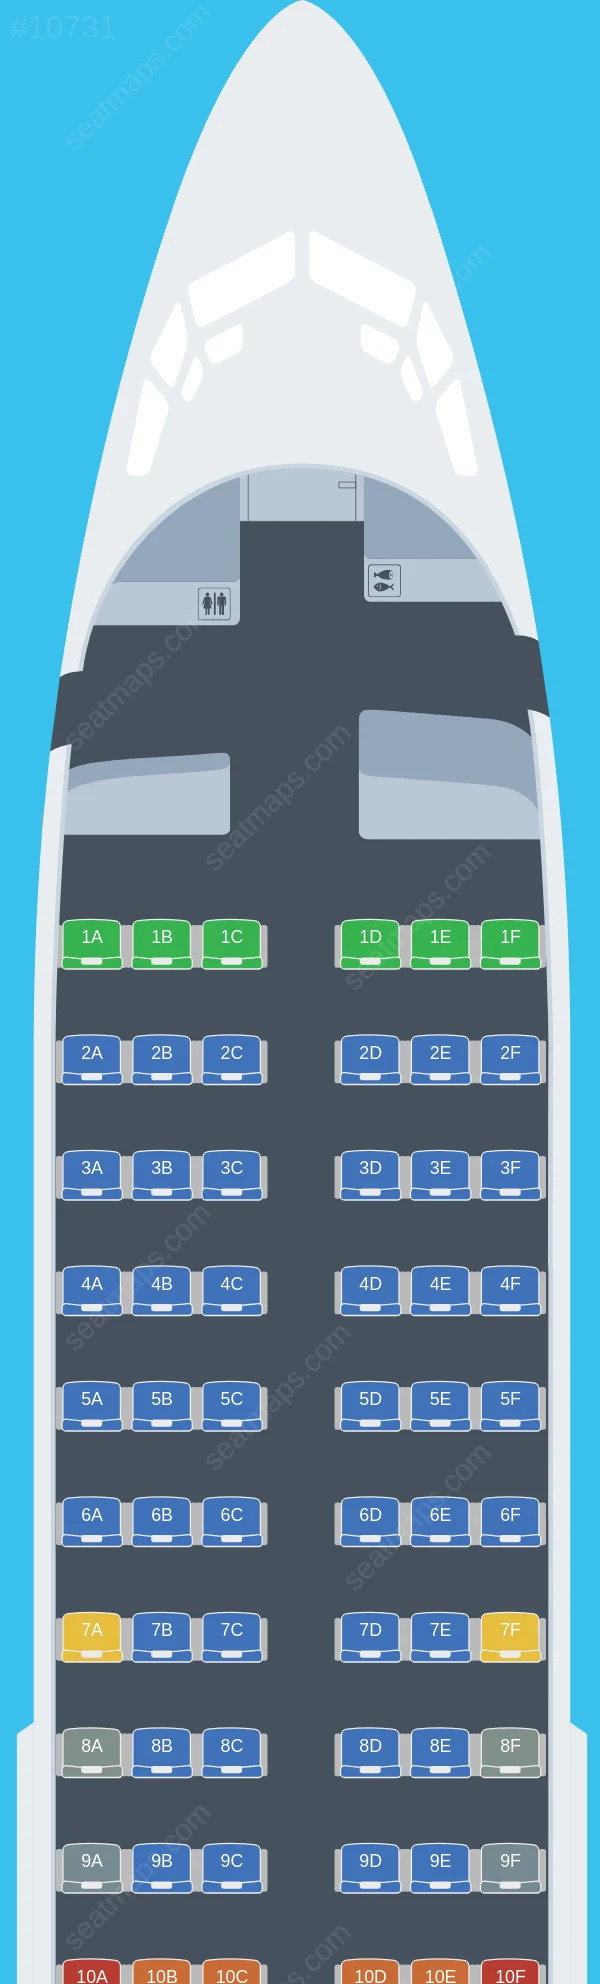 Canadian North Boeing 737-700 seatmap preview